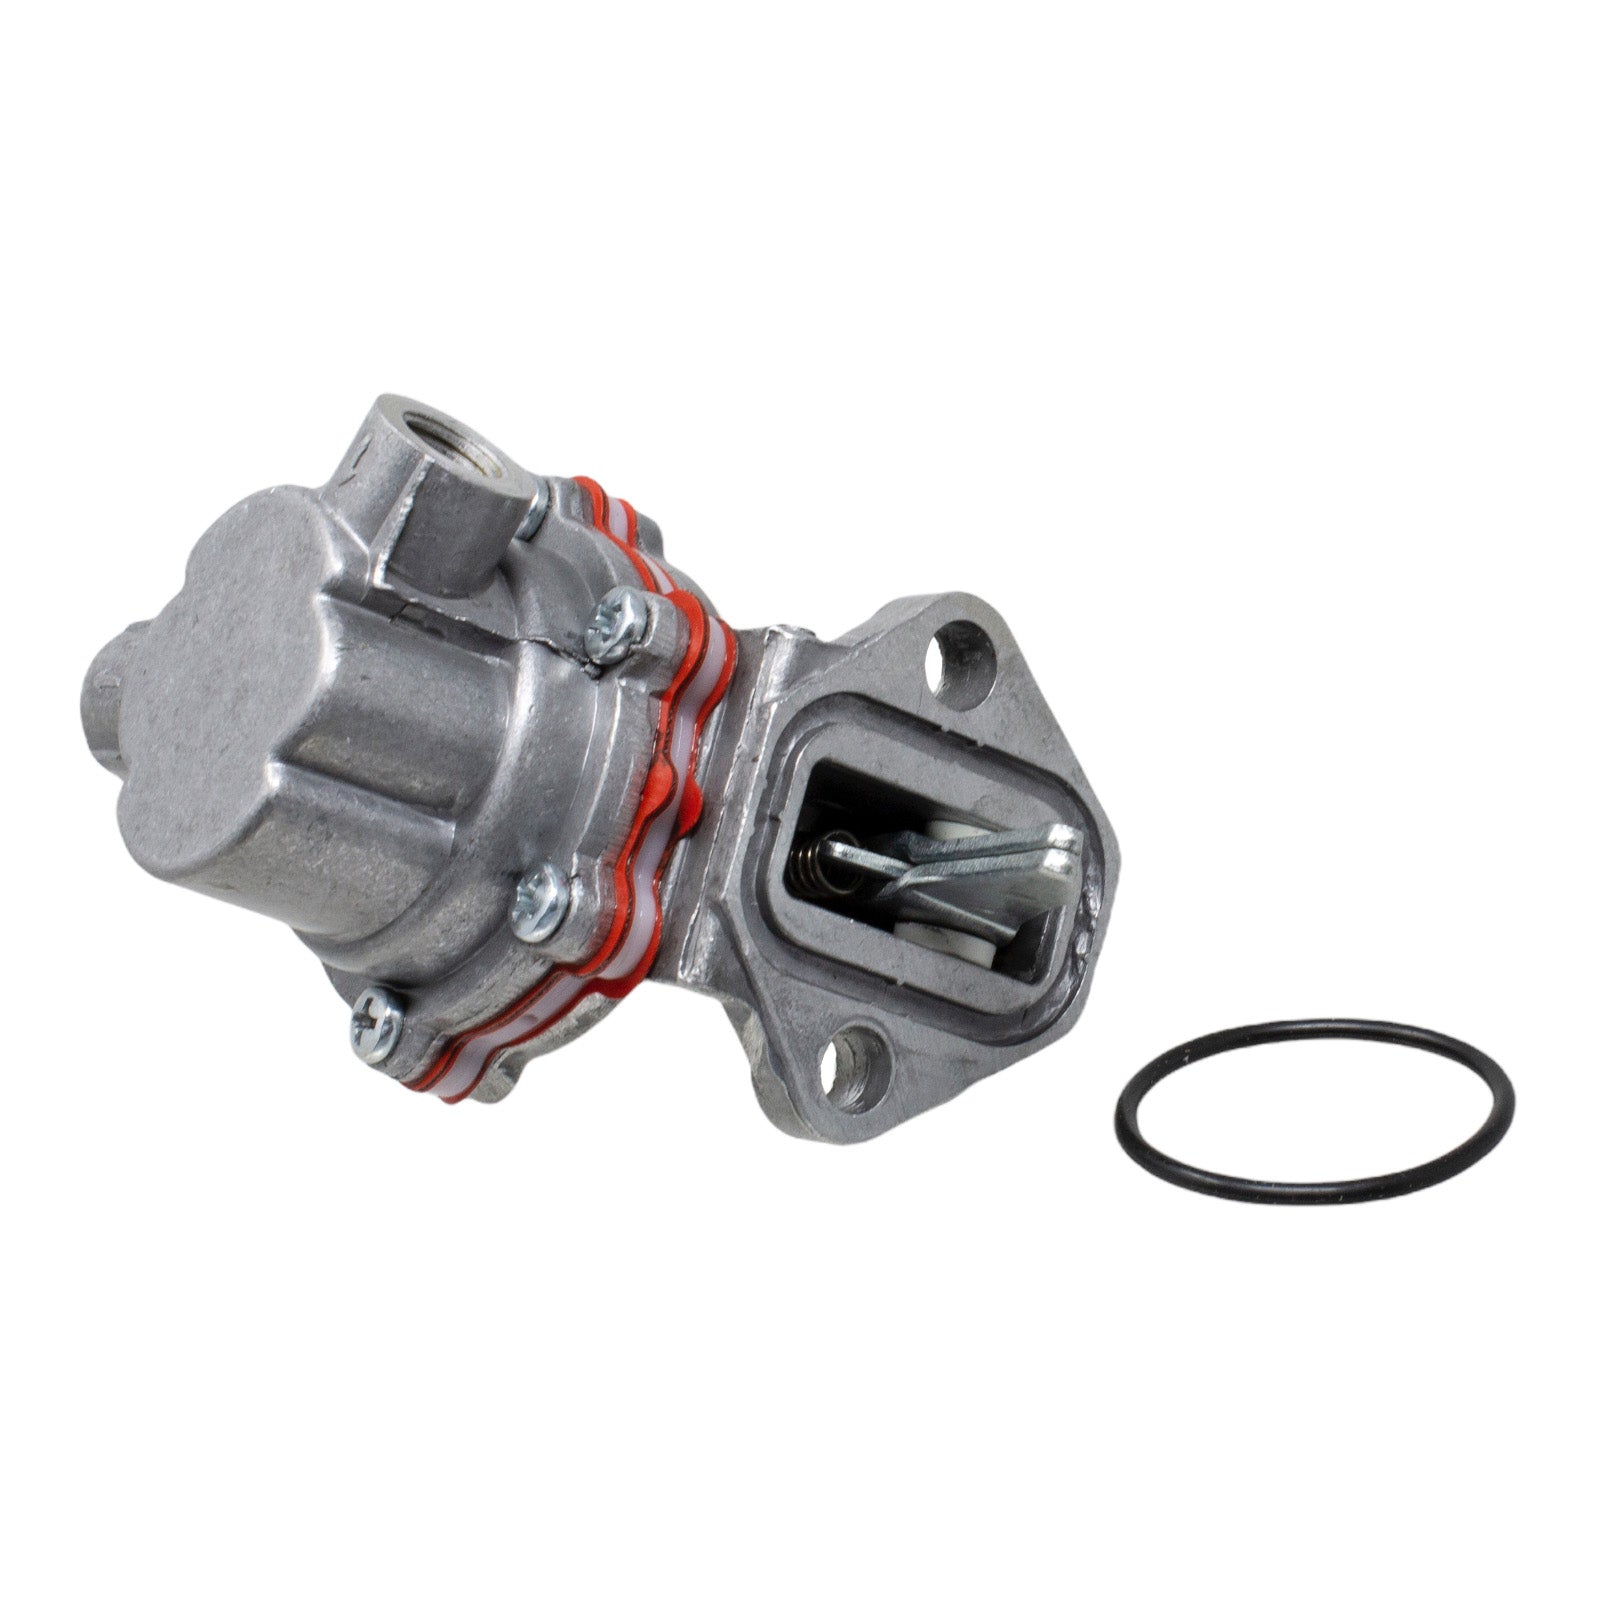 Duraforce 4757883, Fuel Pump For Ford